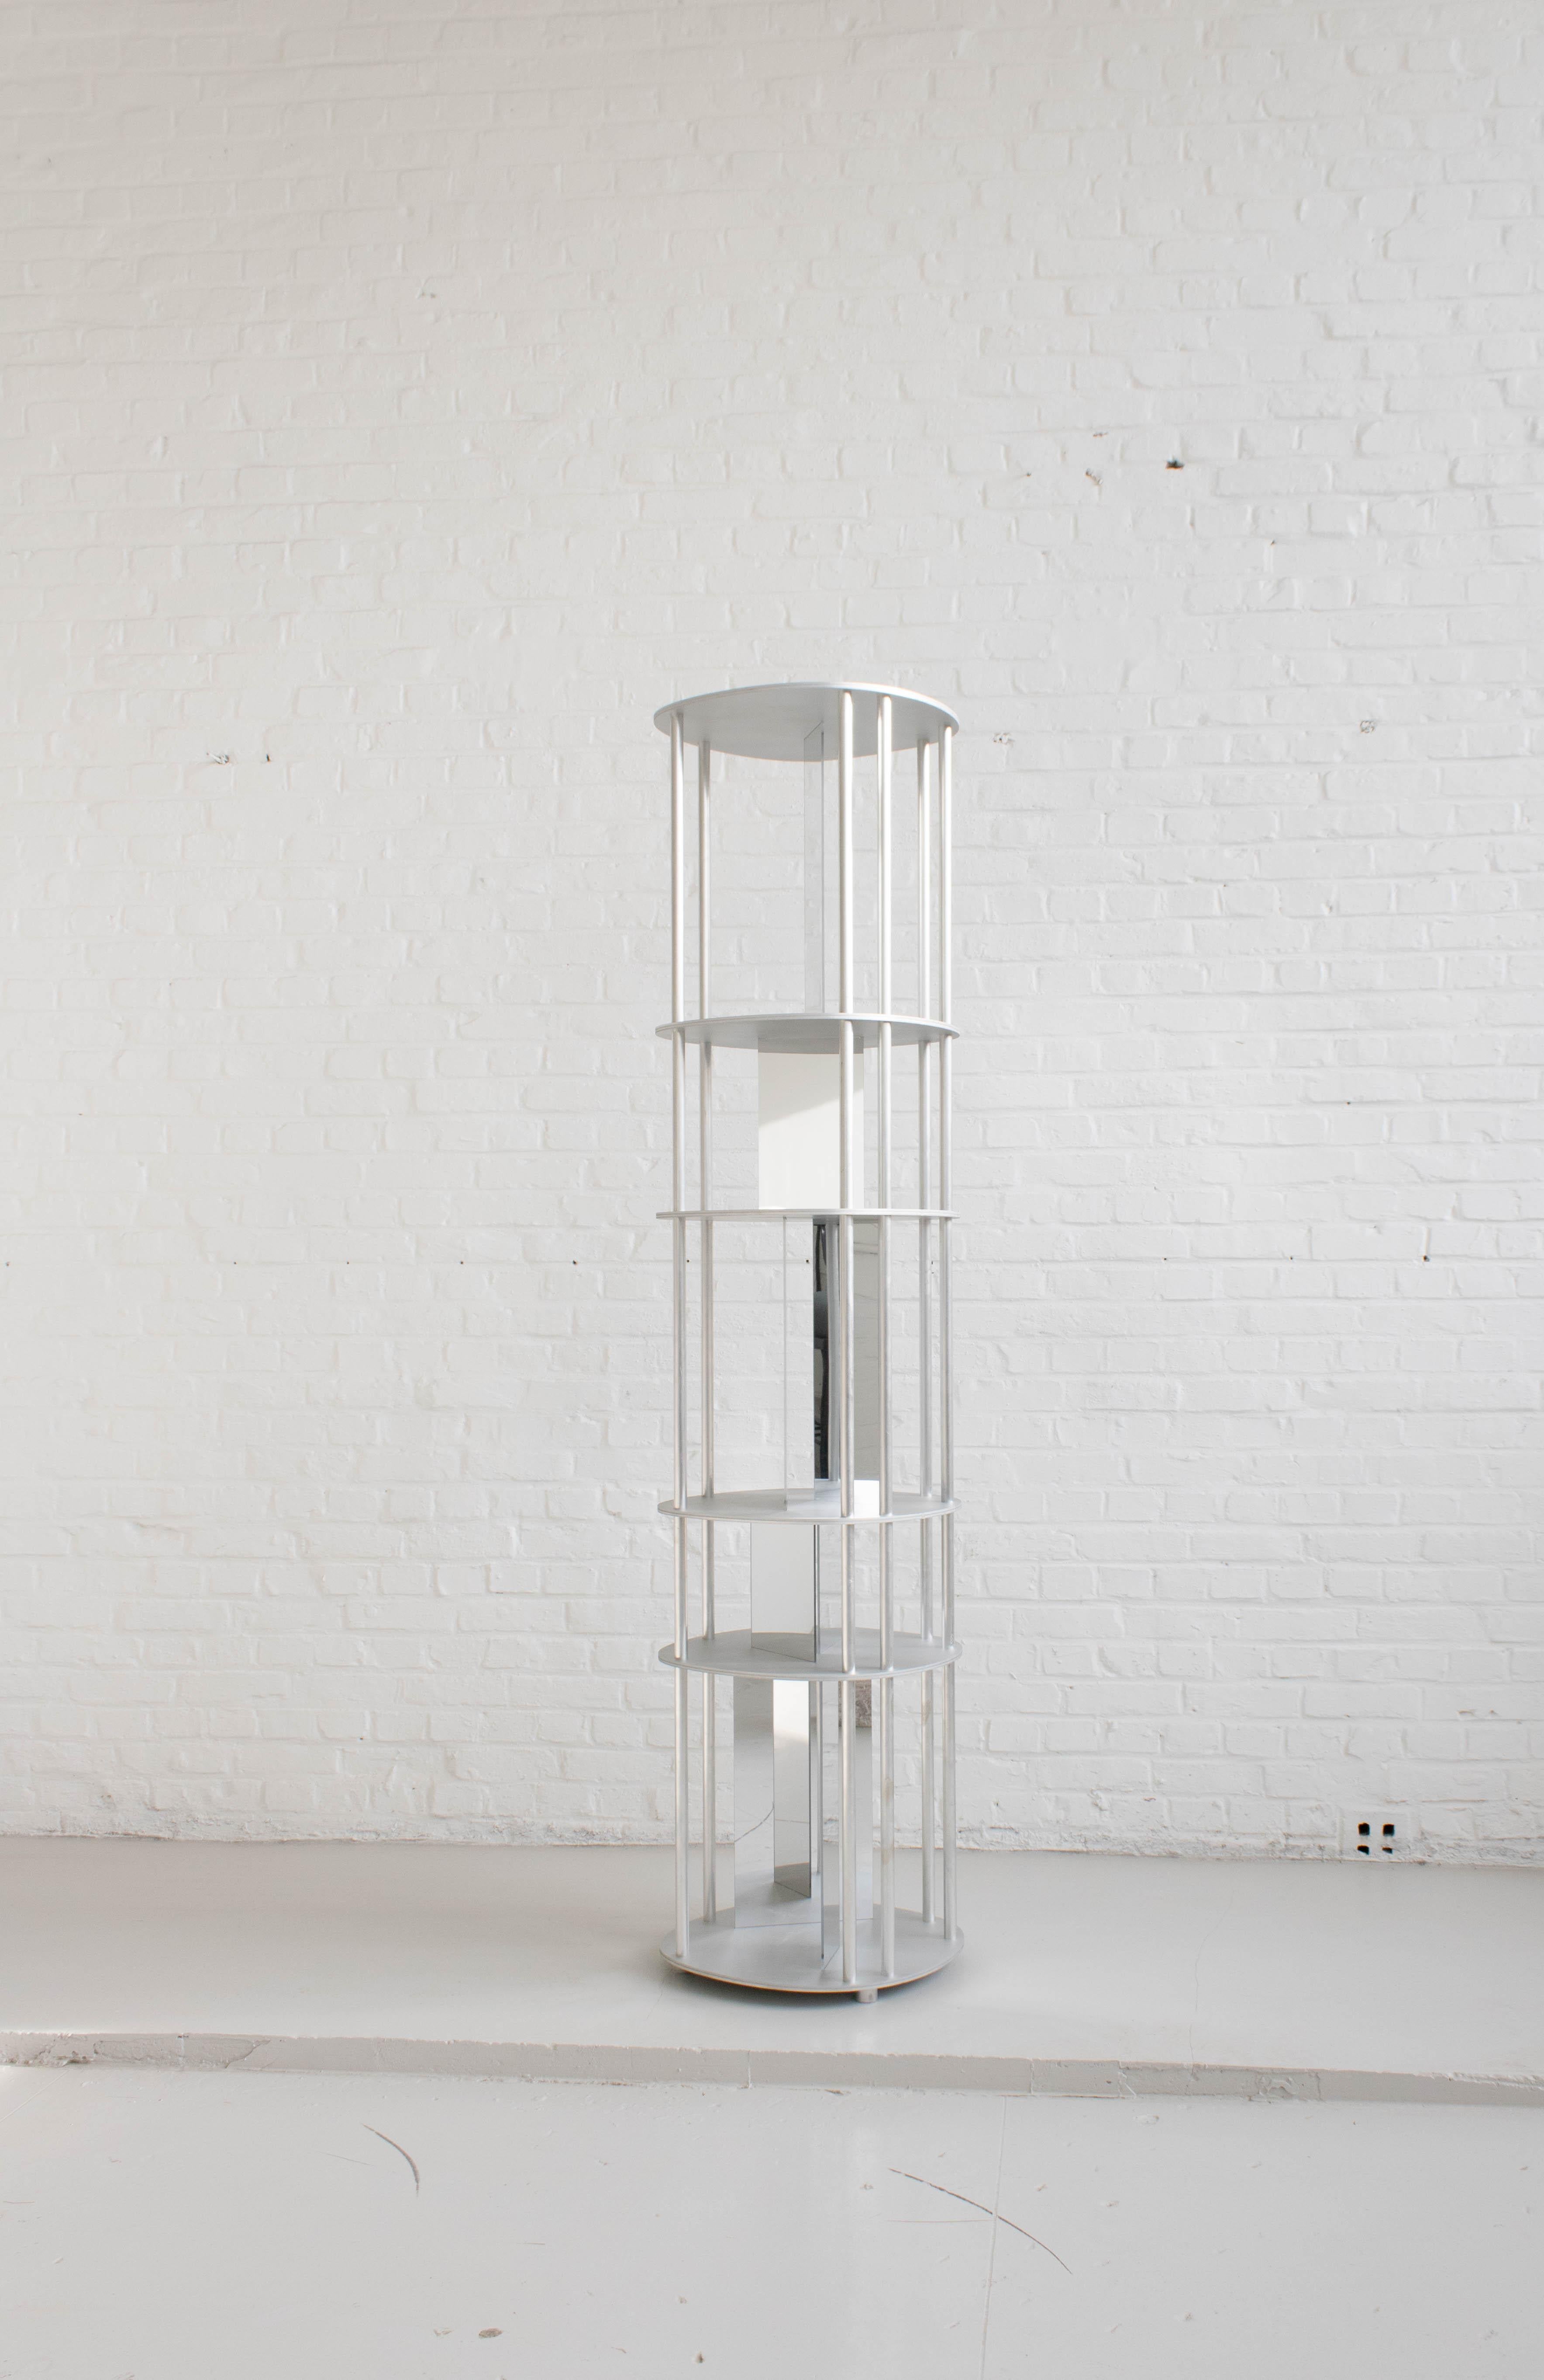 Reflektor rack by Arne Desmet
Dimensions: D 40 x W 43 x H 172.4 cm
Materials: Brushed aluminium plates, aluminium tubes, stainless steel.

Irregular shapes and element placement form the base of the Reflektor rack. The shelves of the object are